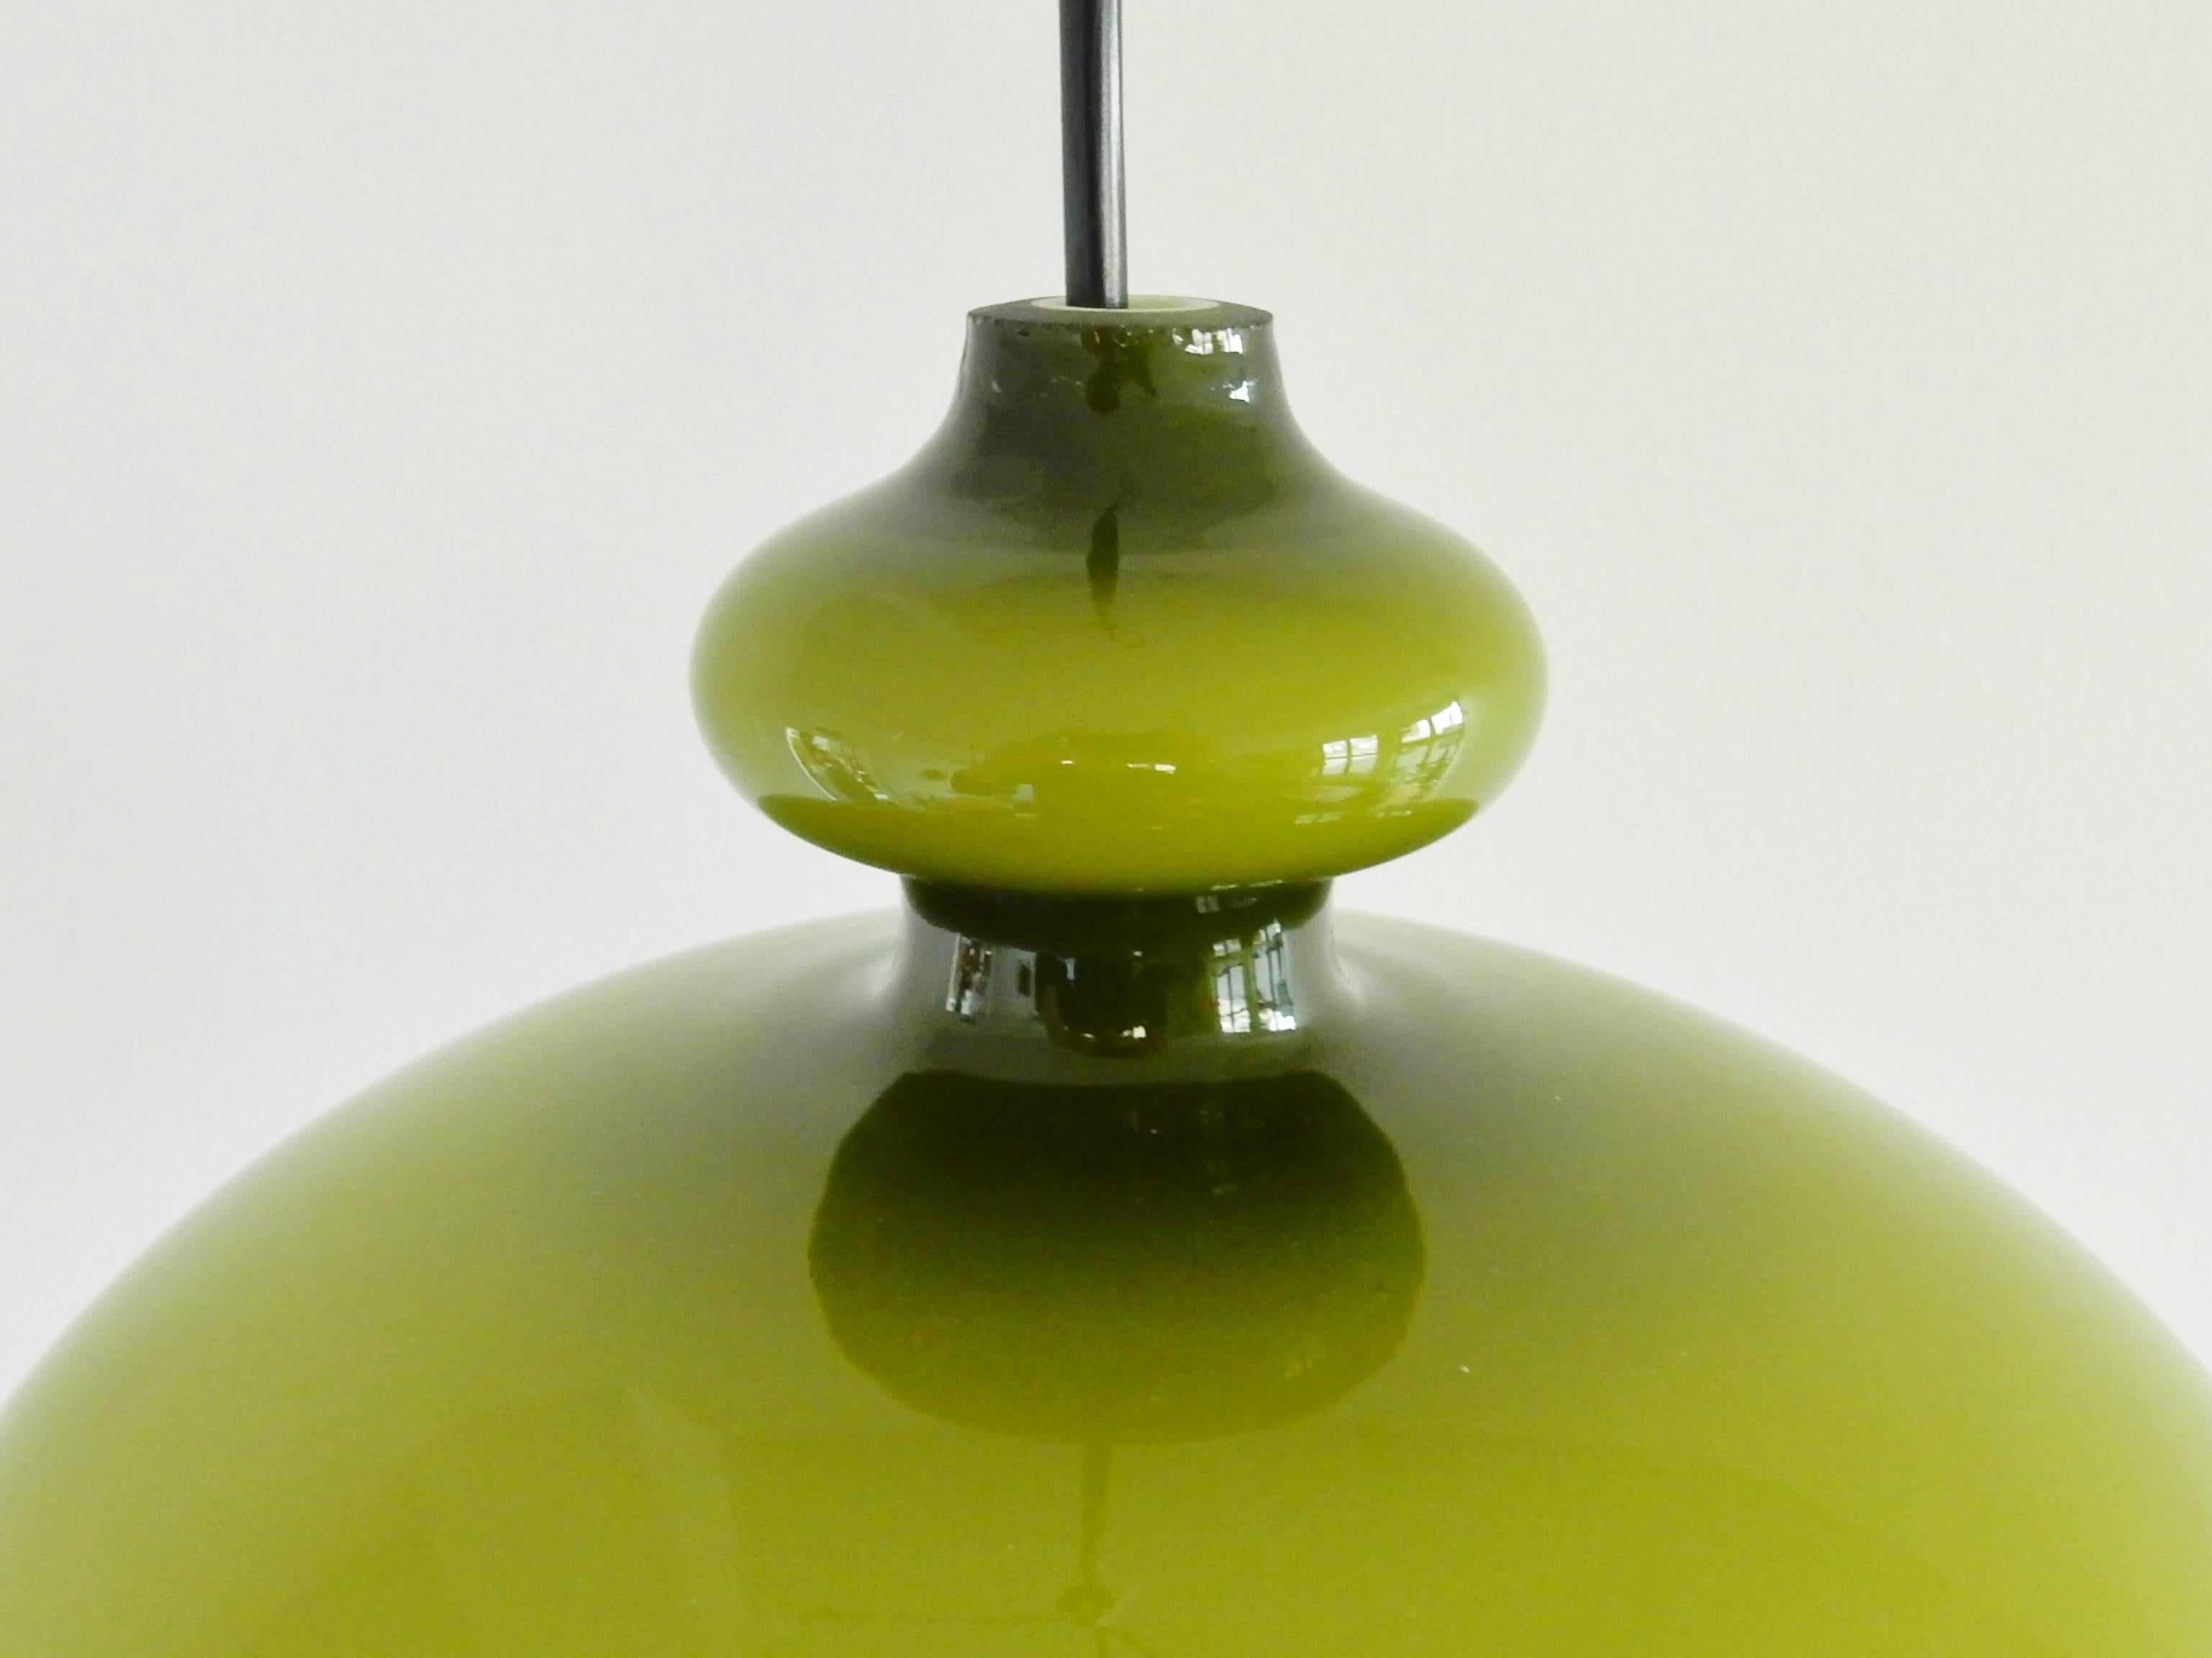 Warm green colored glass pendant lamp with an opaline inside for a beautiful softened light.
The white opaline inner glass has one small chip to the bottom edge. The green glass is in perfect condition.